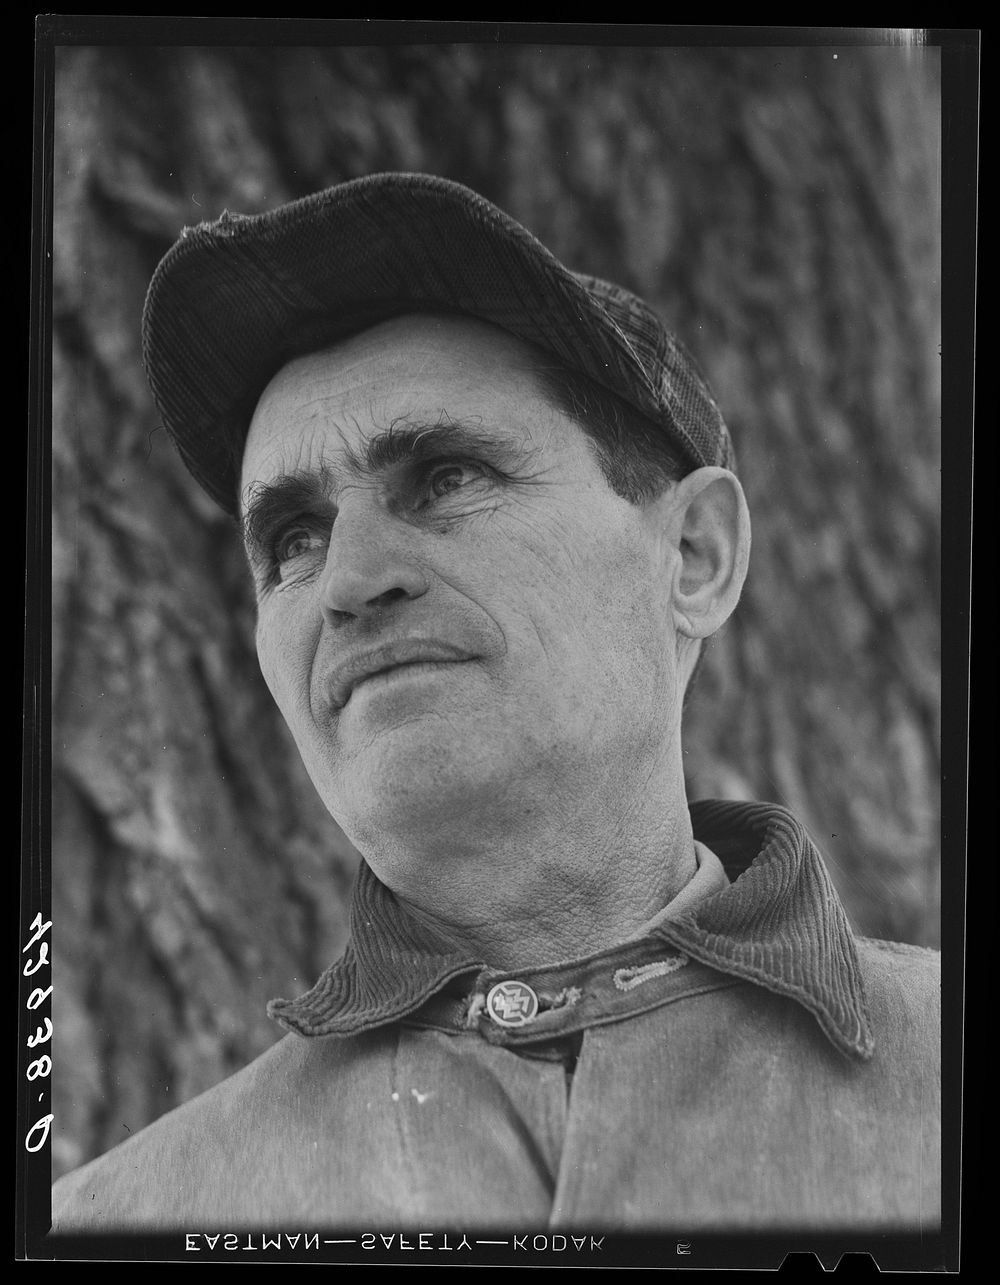 Mr. Joquin Silva, Portugese poultry and market farmer. His two sons work in town. Chelmsford, Massachusetts. Sourced from…